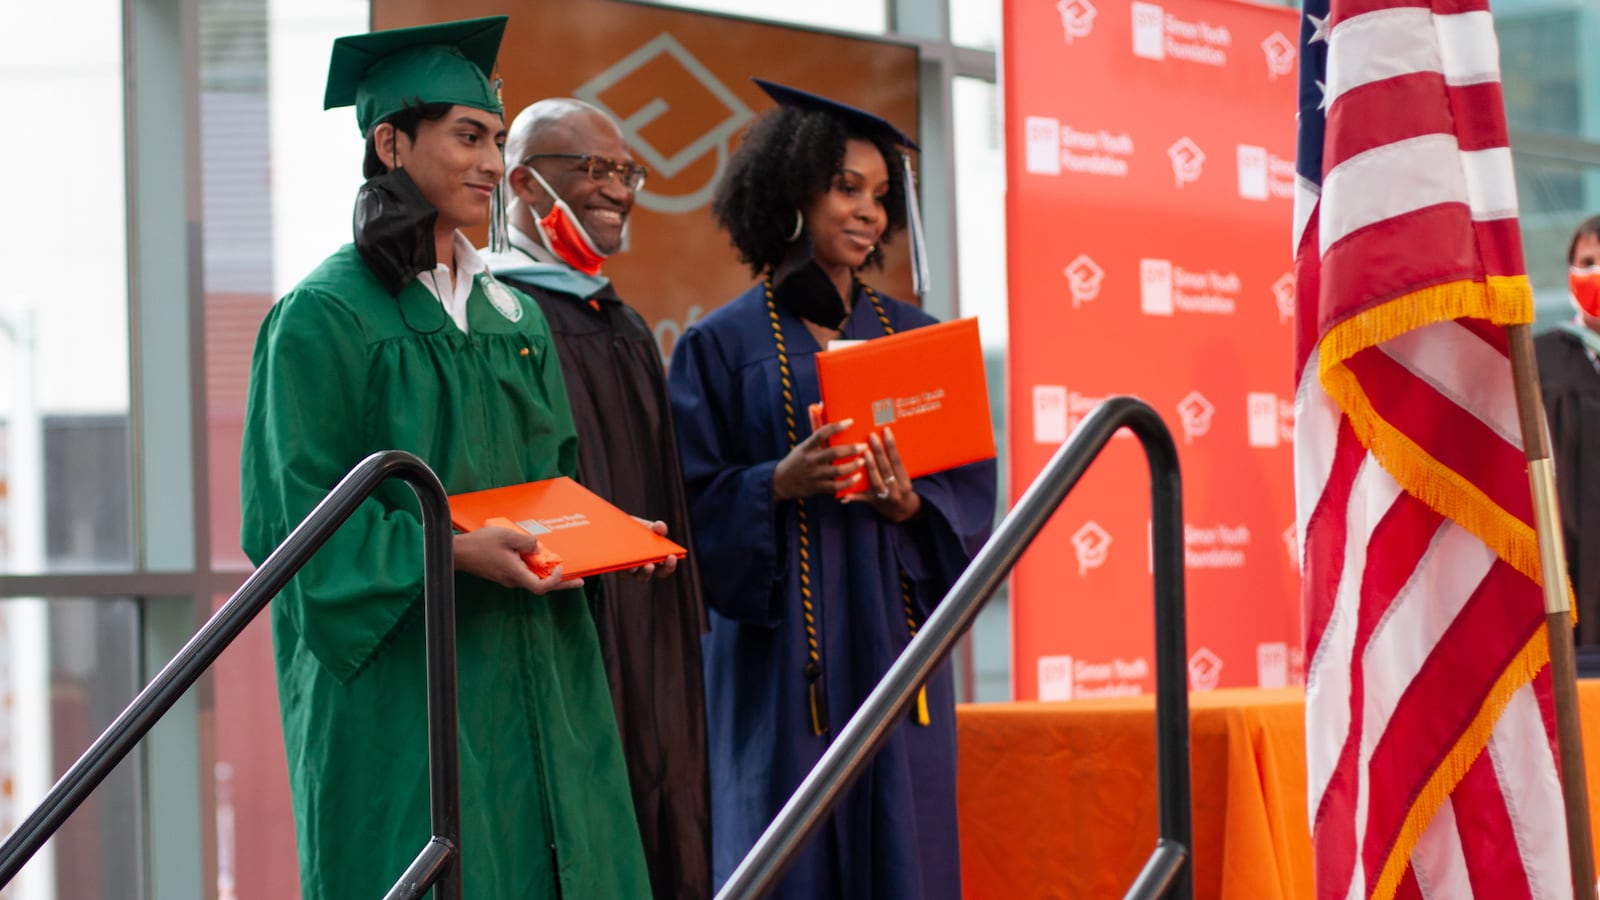 Two students, one wearing green graduation garb and the other wearing a blue cap and gown, hold orange award binders next to a their principal.